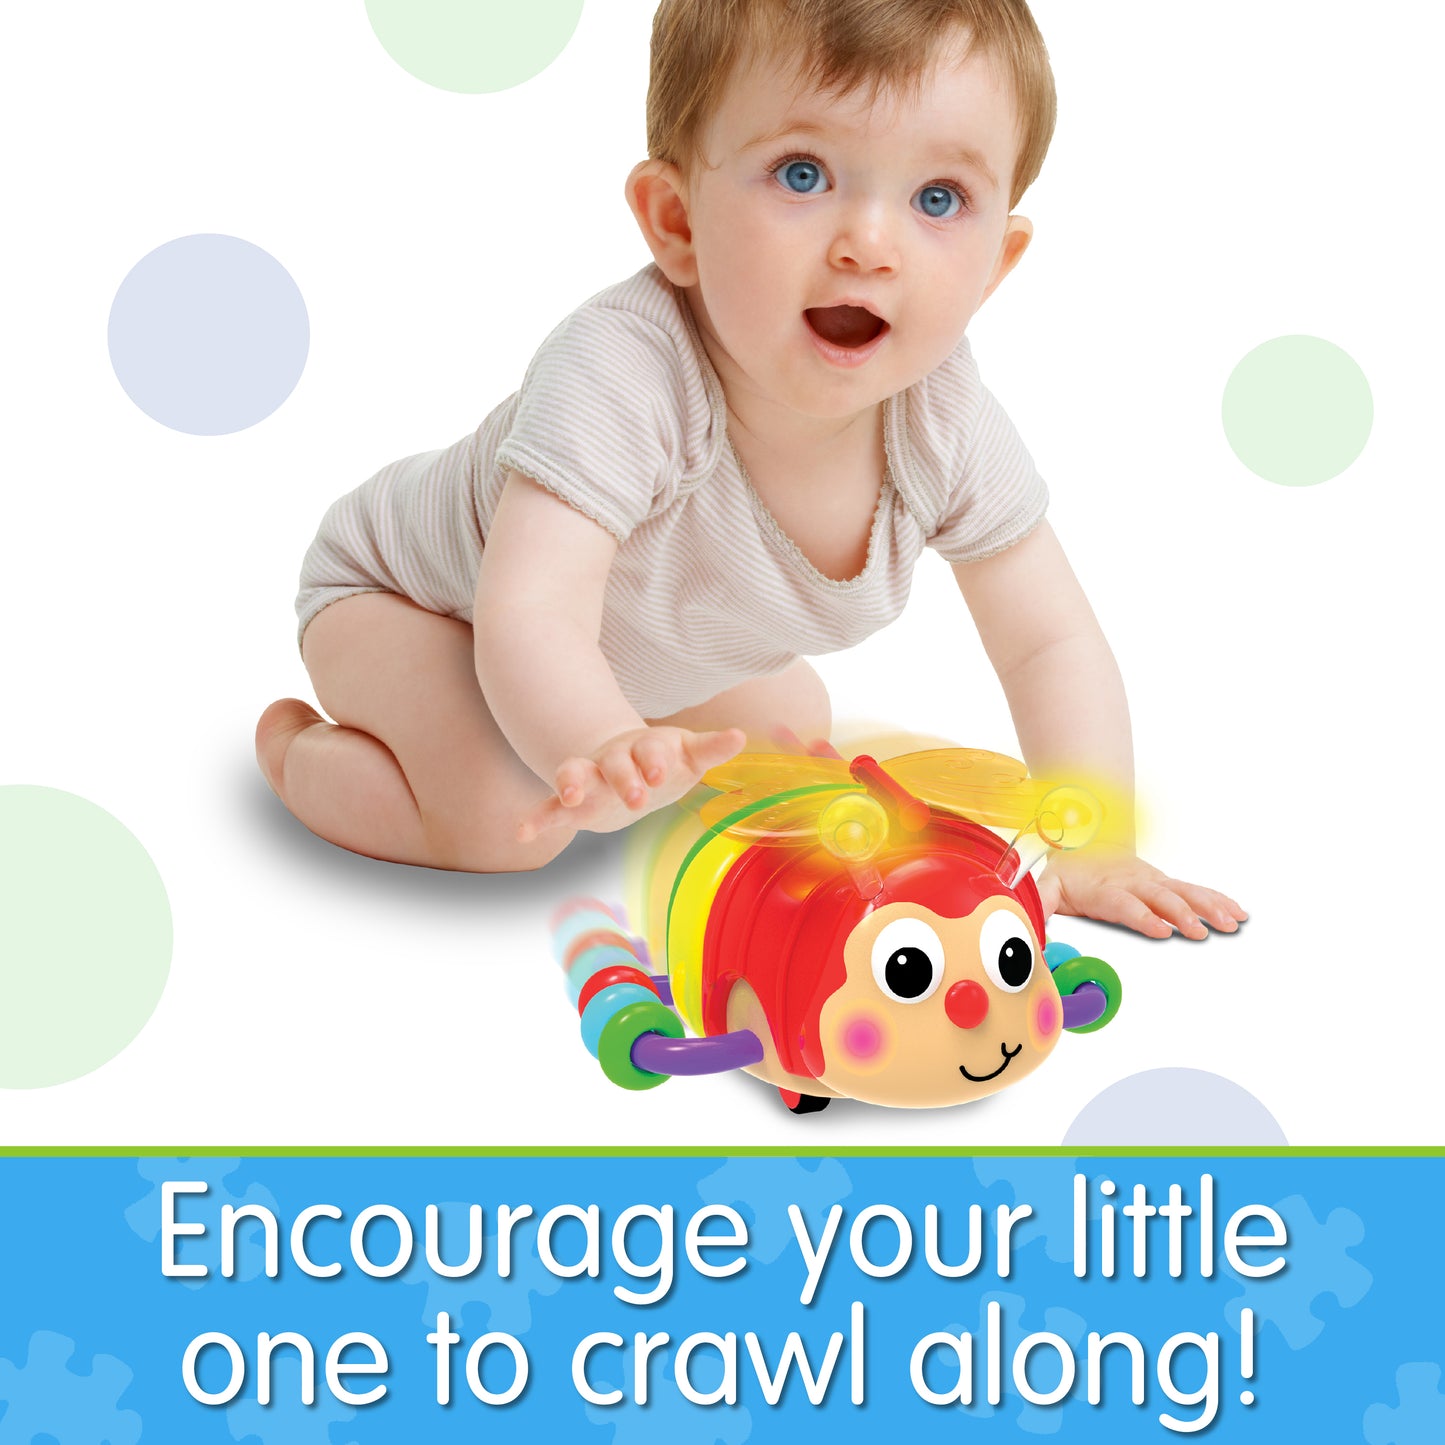 Infographic of young baby boy with Crawl About Butterfly that reads "Encourage your little one to crawl along!"